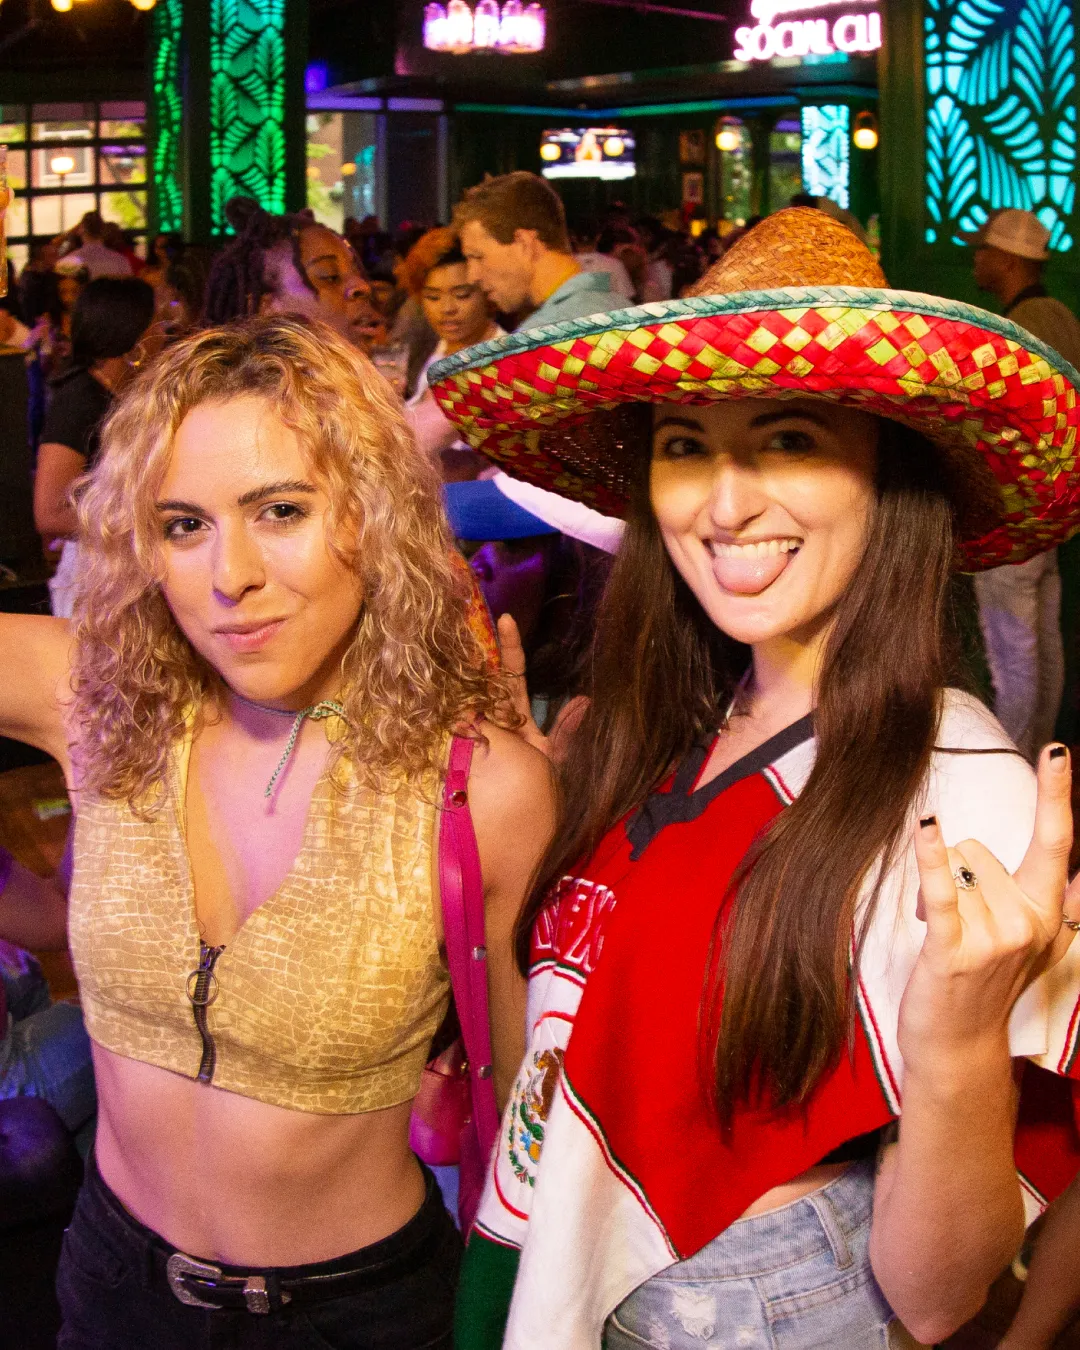 Animated duo, decked out in traditional cinco de mayo attire sharing laughs and toasts amidst the bustling bar crawl festivities
